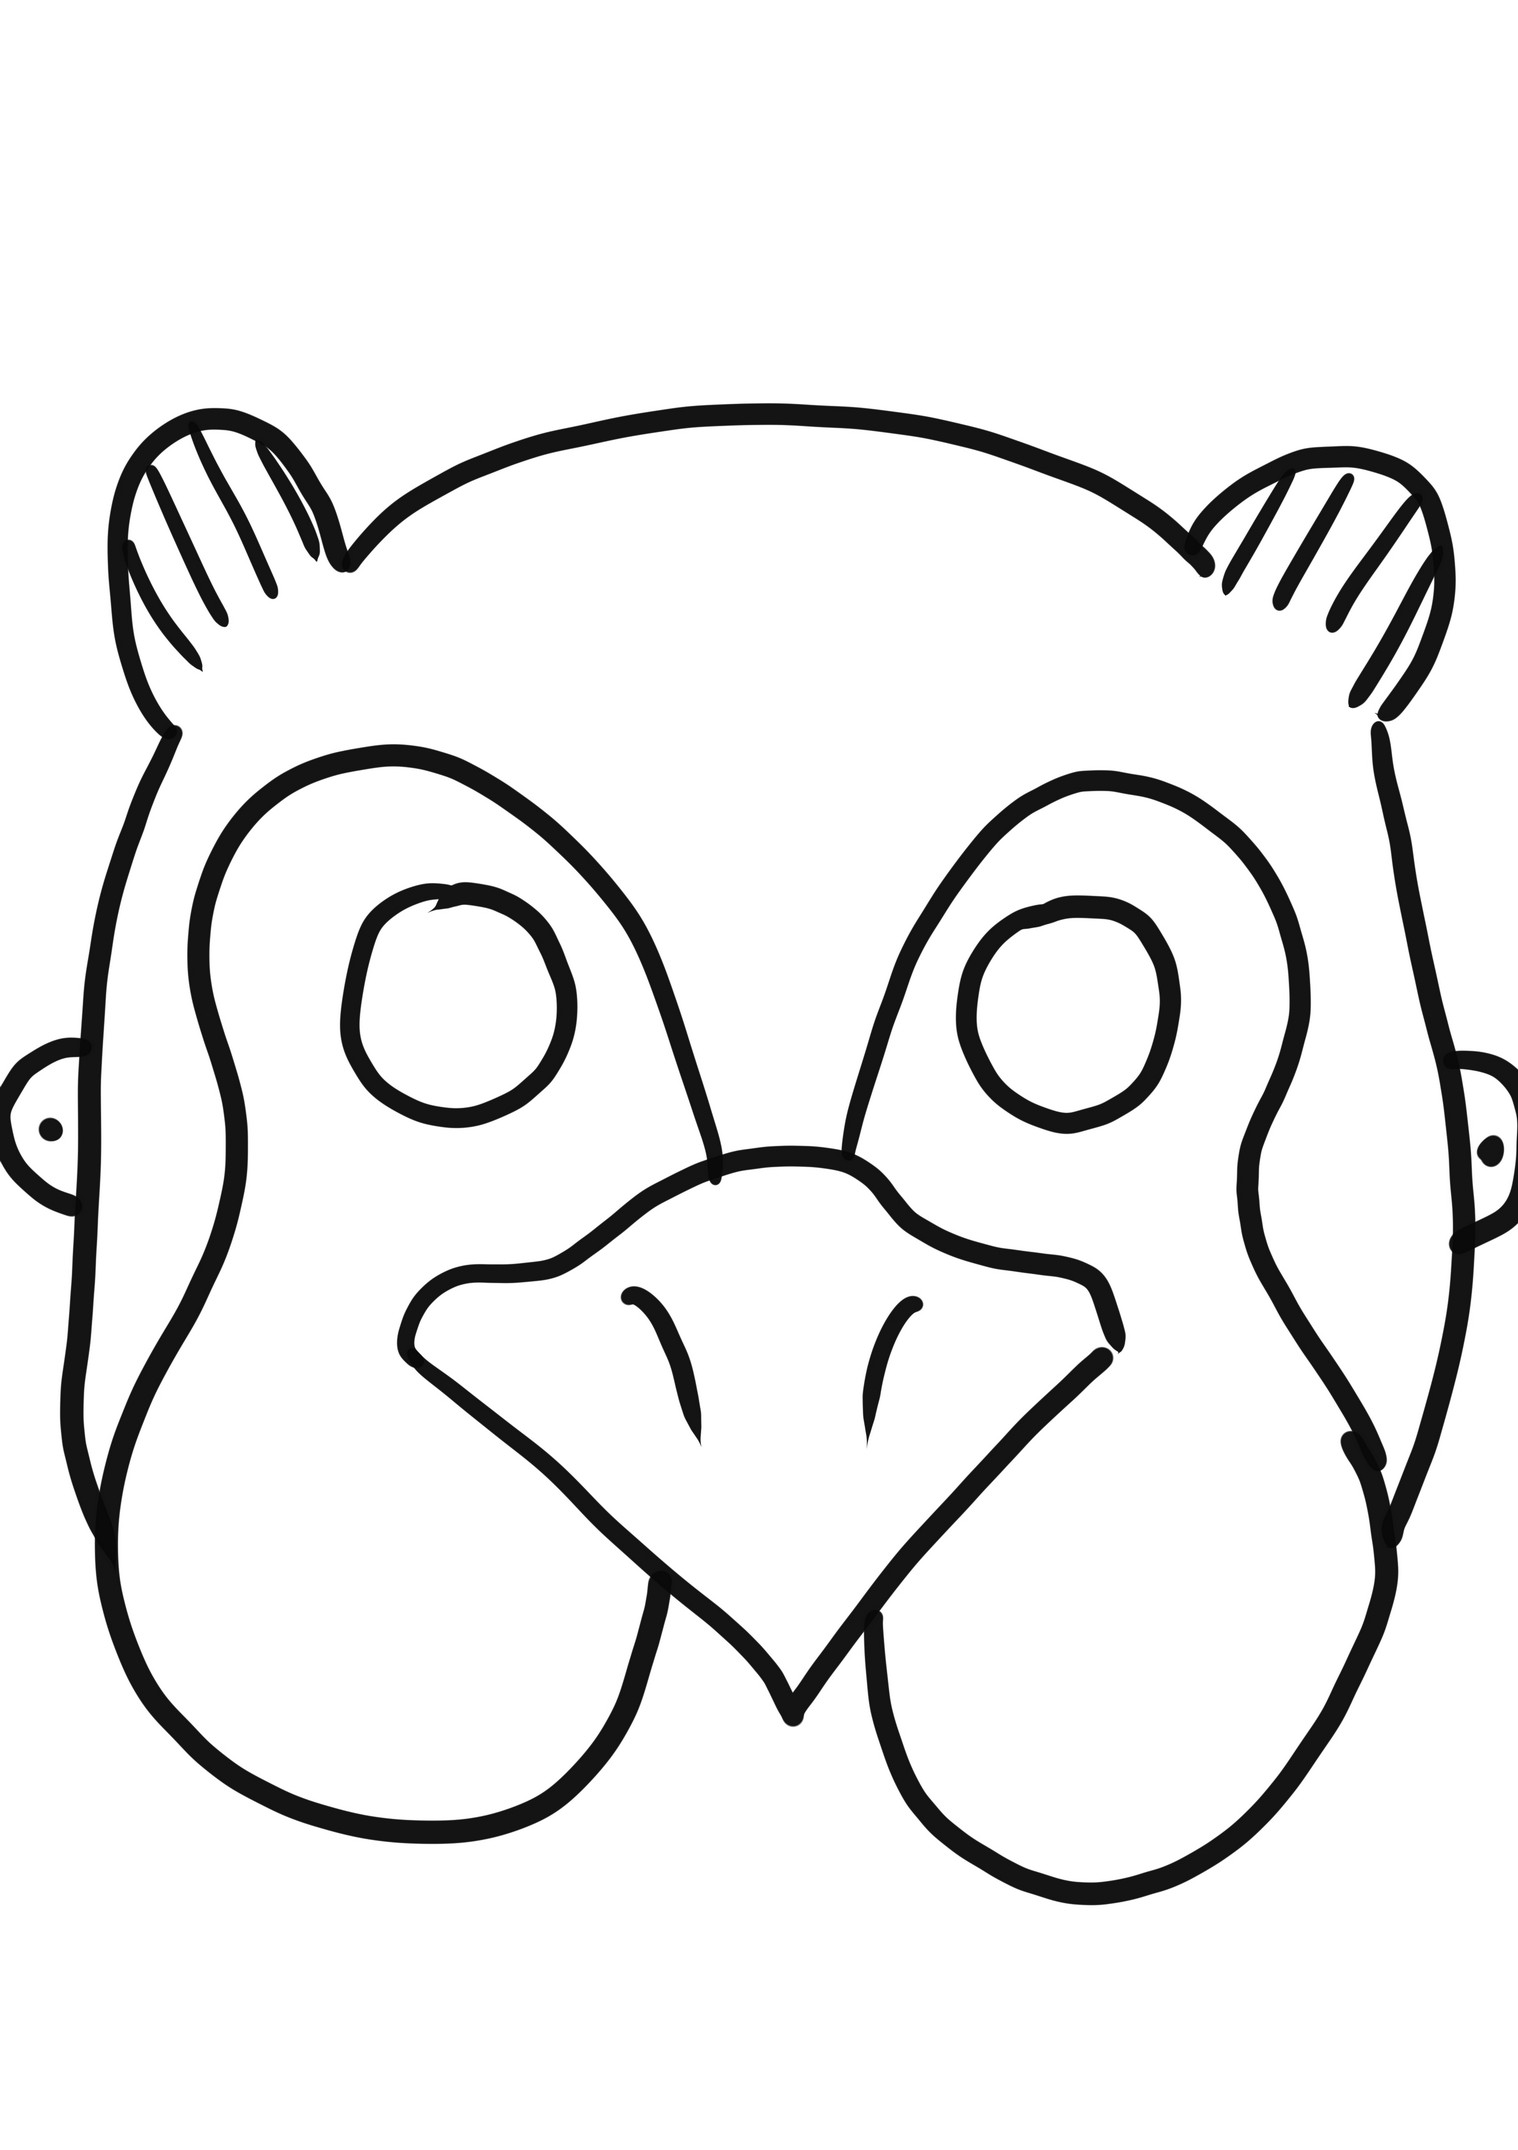 Pheasant Mask coloring page to cut out